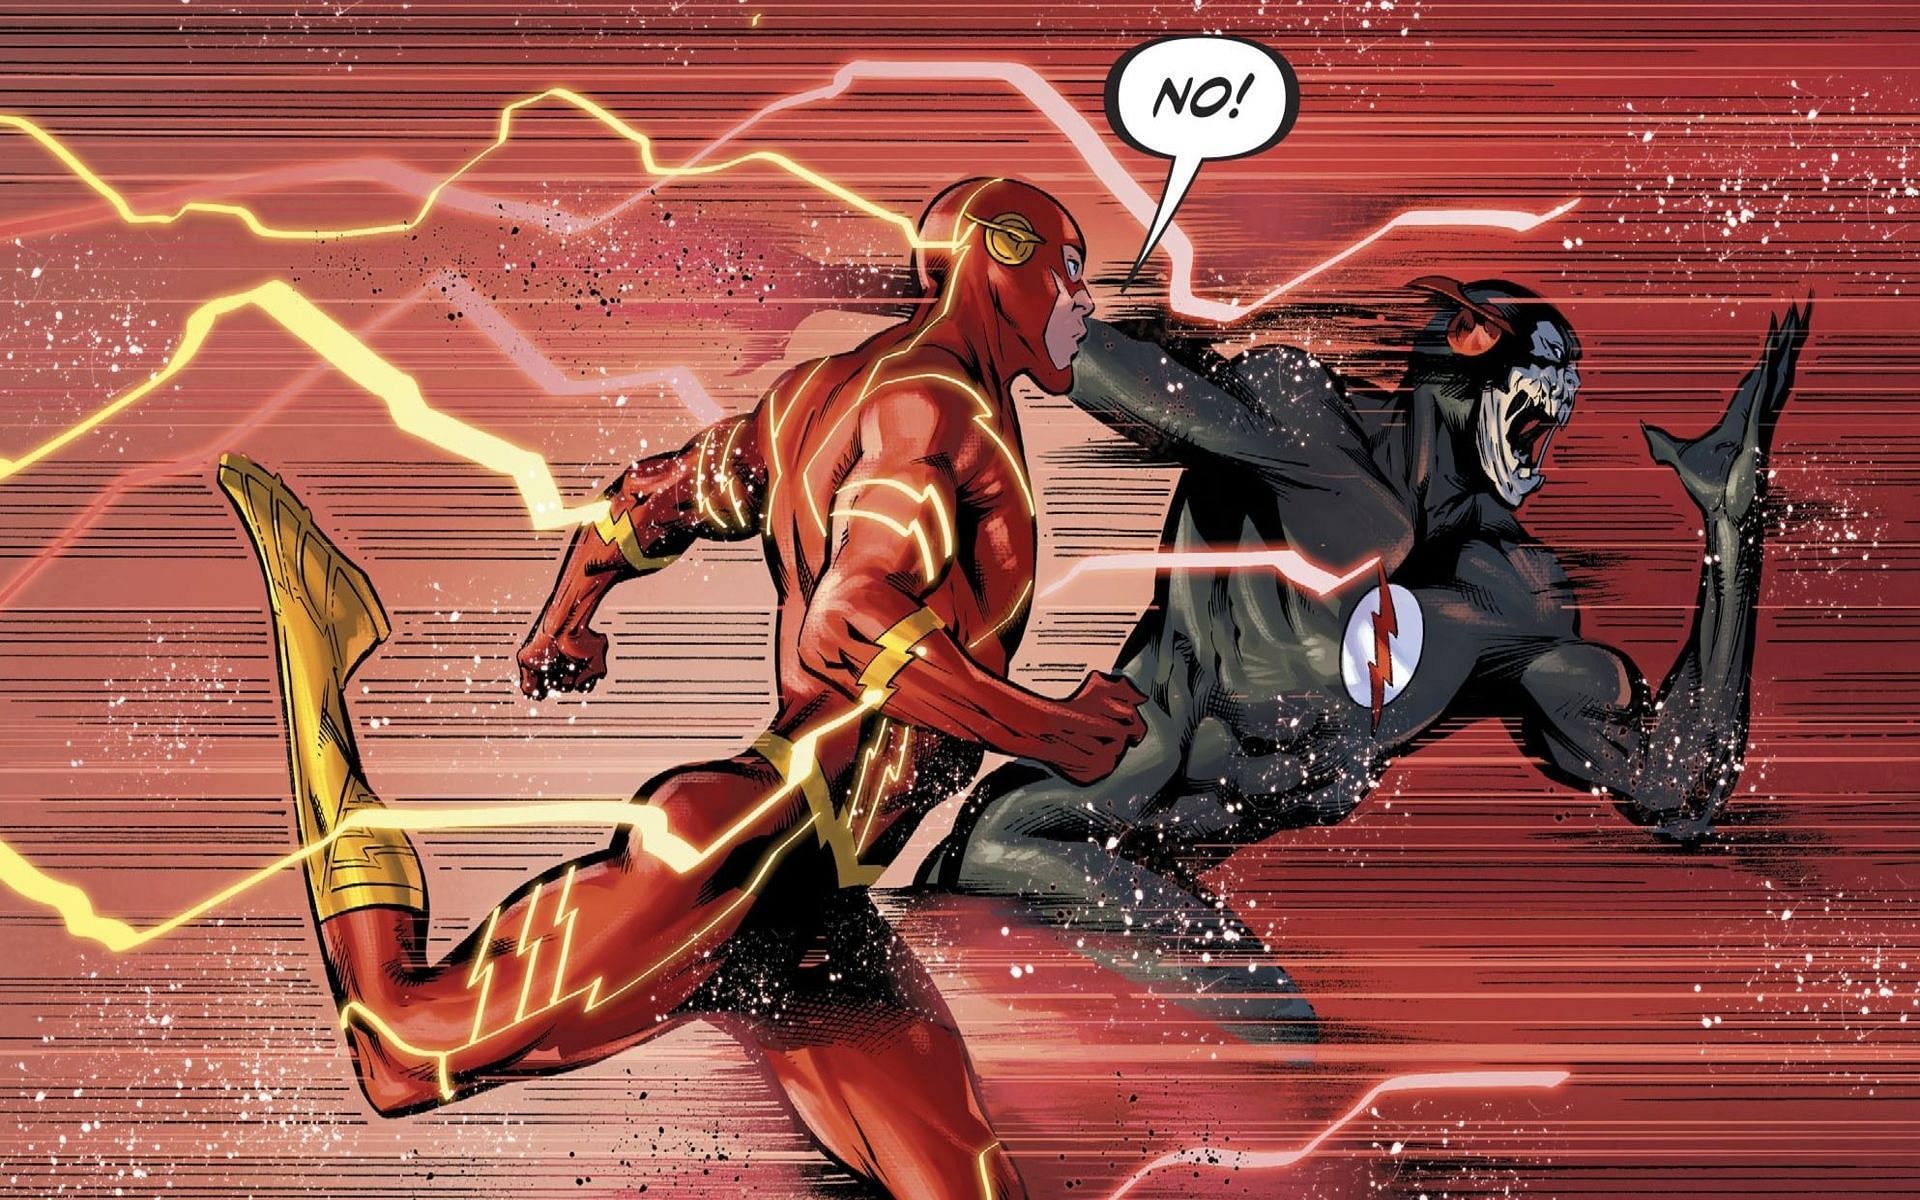 A Panel of The Flash from DC Comics